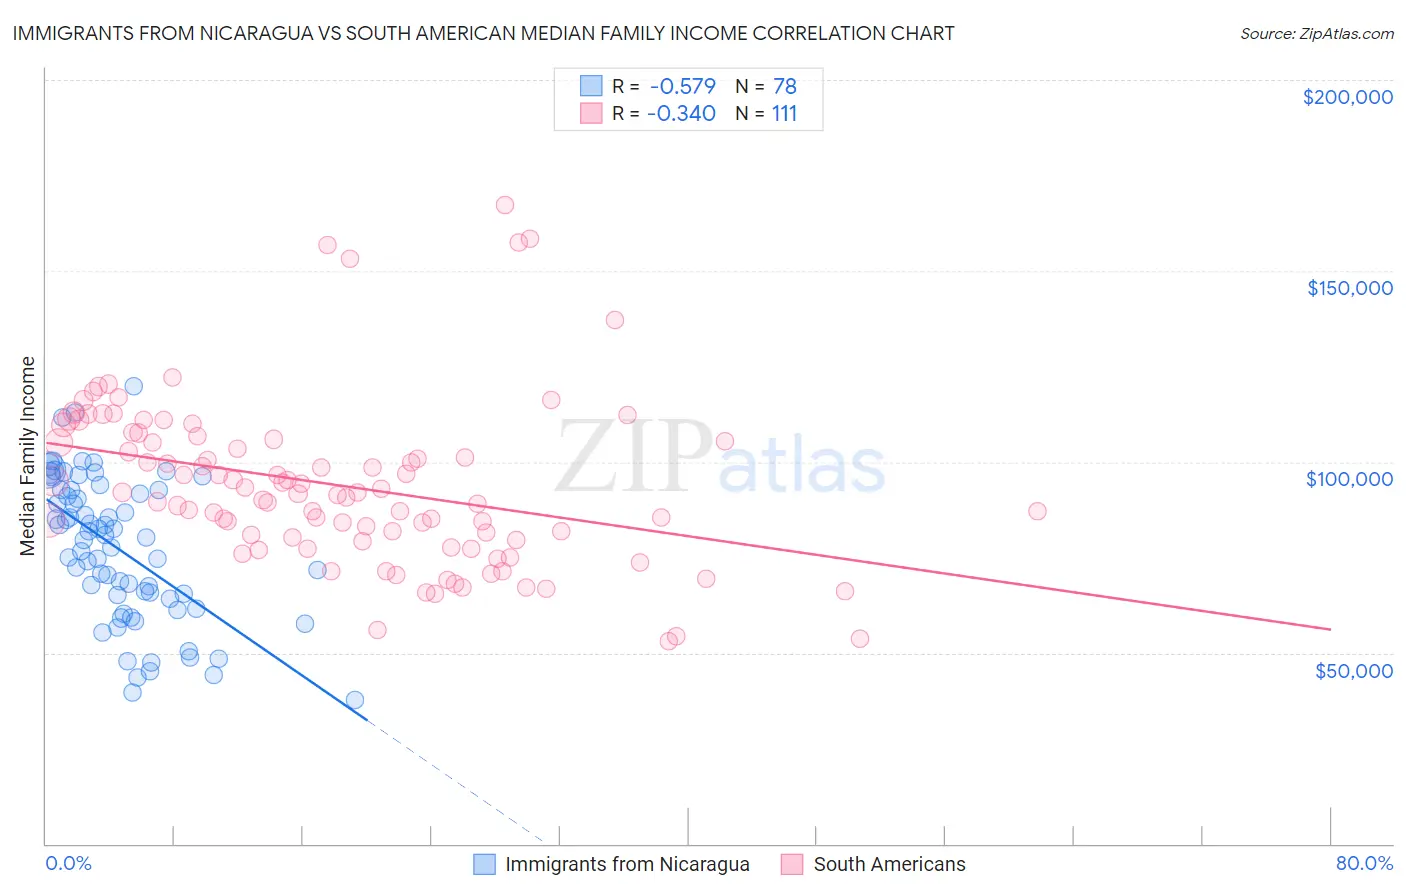 Immigrants from Nicaragua vs South American Median Family Income